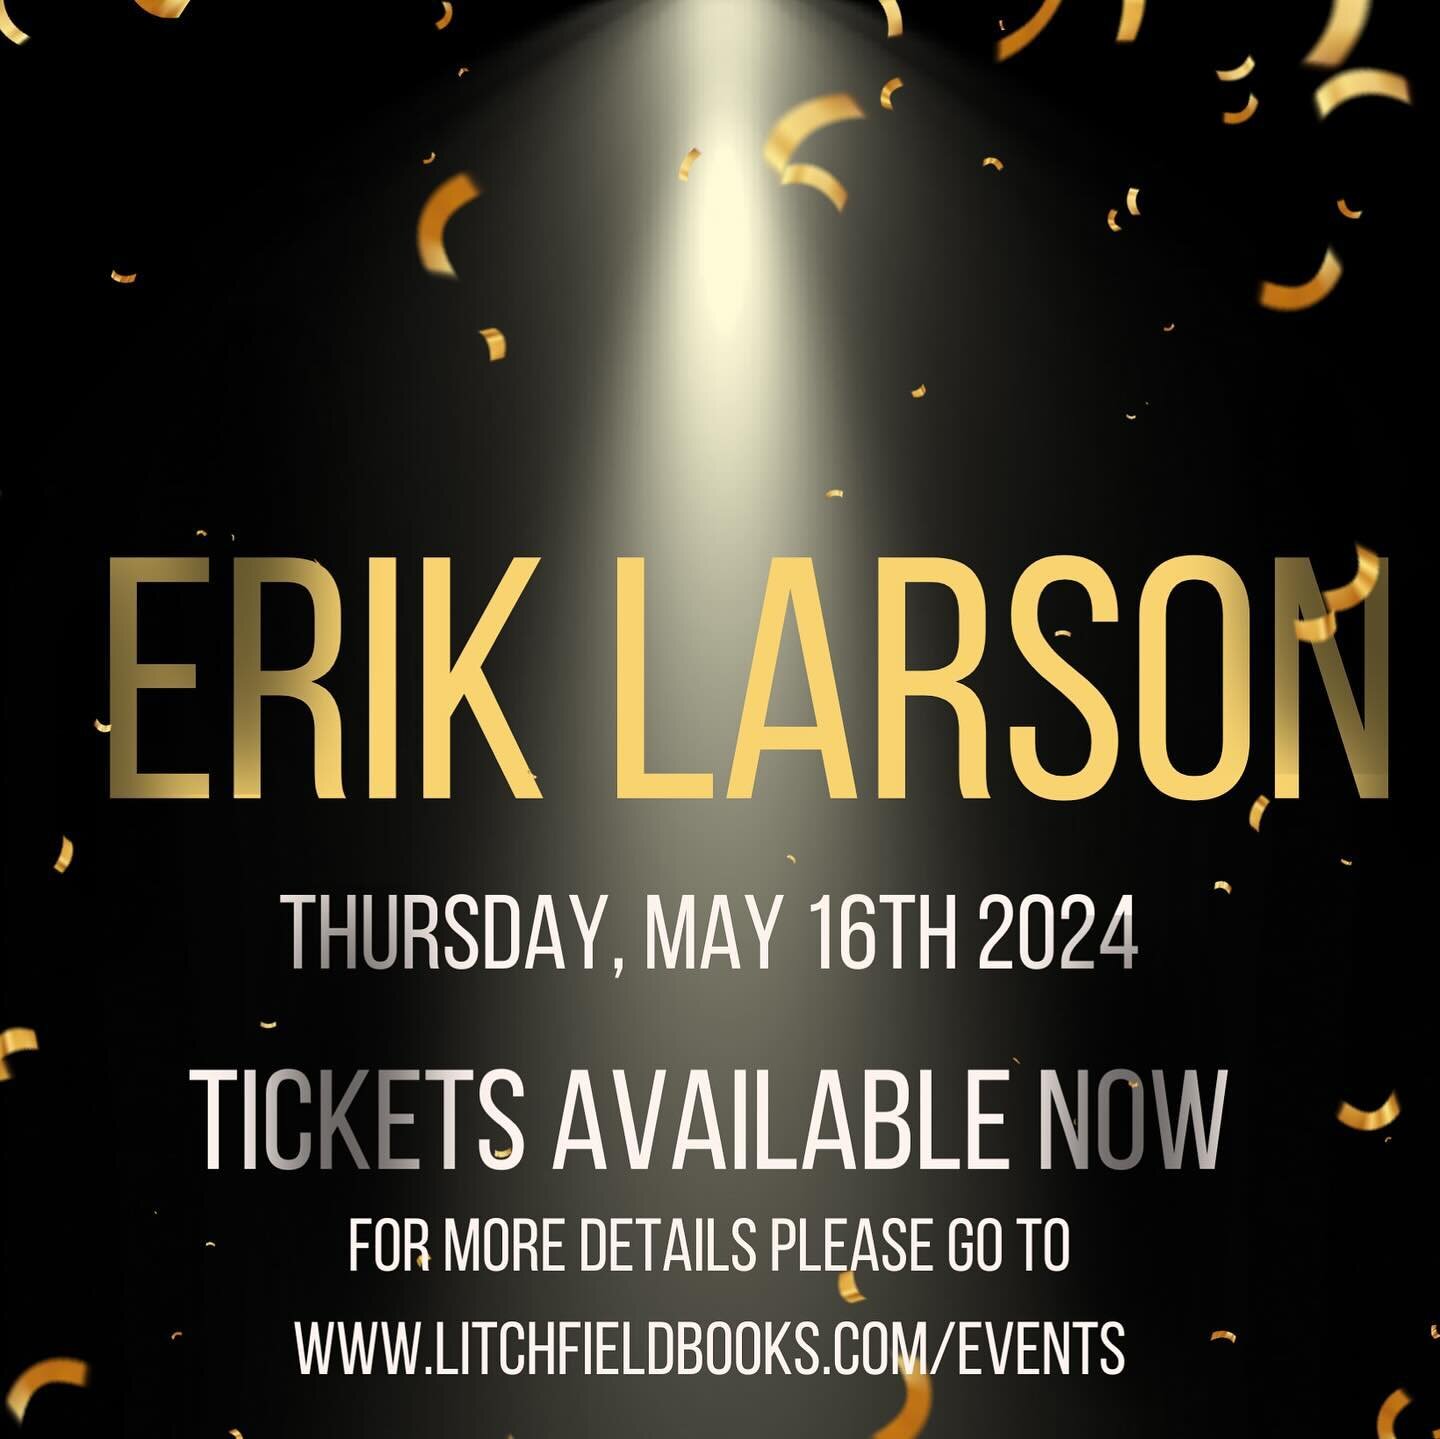 ERIK LARSON!!! 🎉🎉Coming for a Litchfield Books Exclusive Author Event on Thursday May 16th 2024!!! To purchase tickets &amp; For more details such as price, what&rsquo;s included in your ticket, location, time, etc, please go to 
https://www.litchf